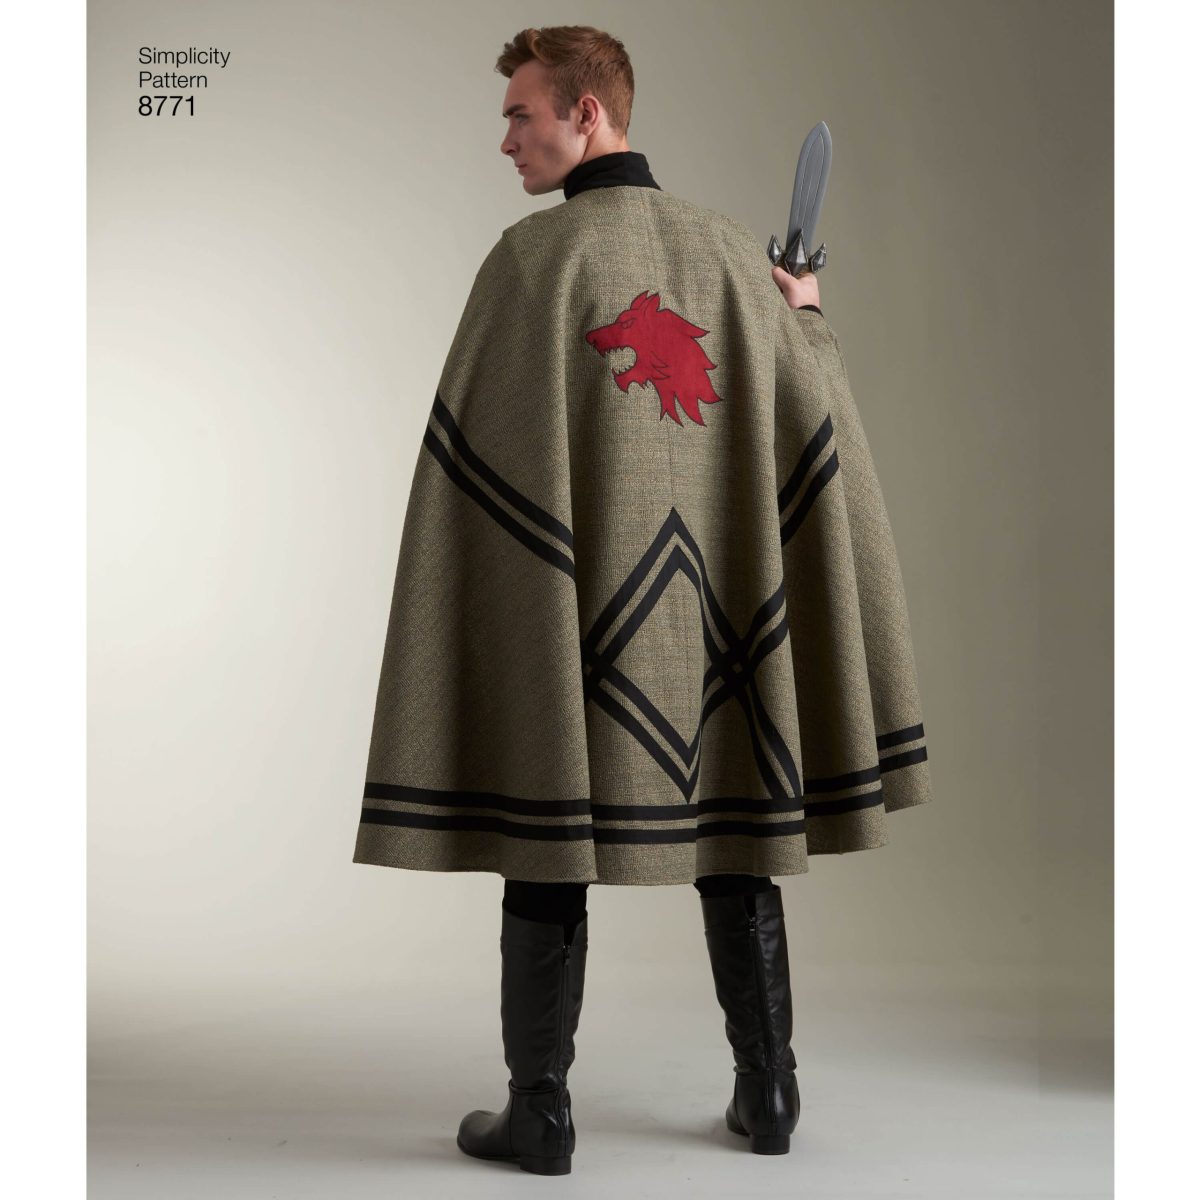 Simplicity Sewing Pattern 8771 Unisex Capes